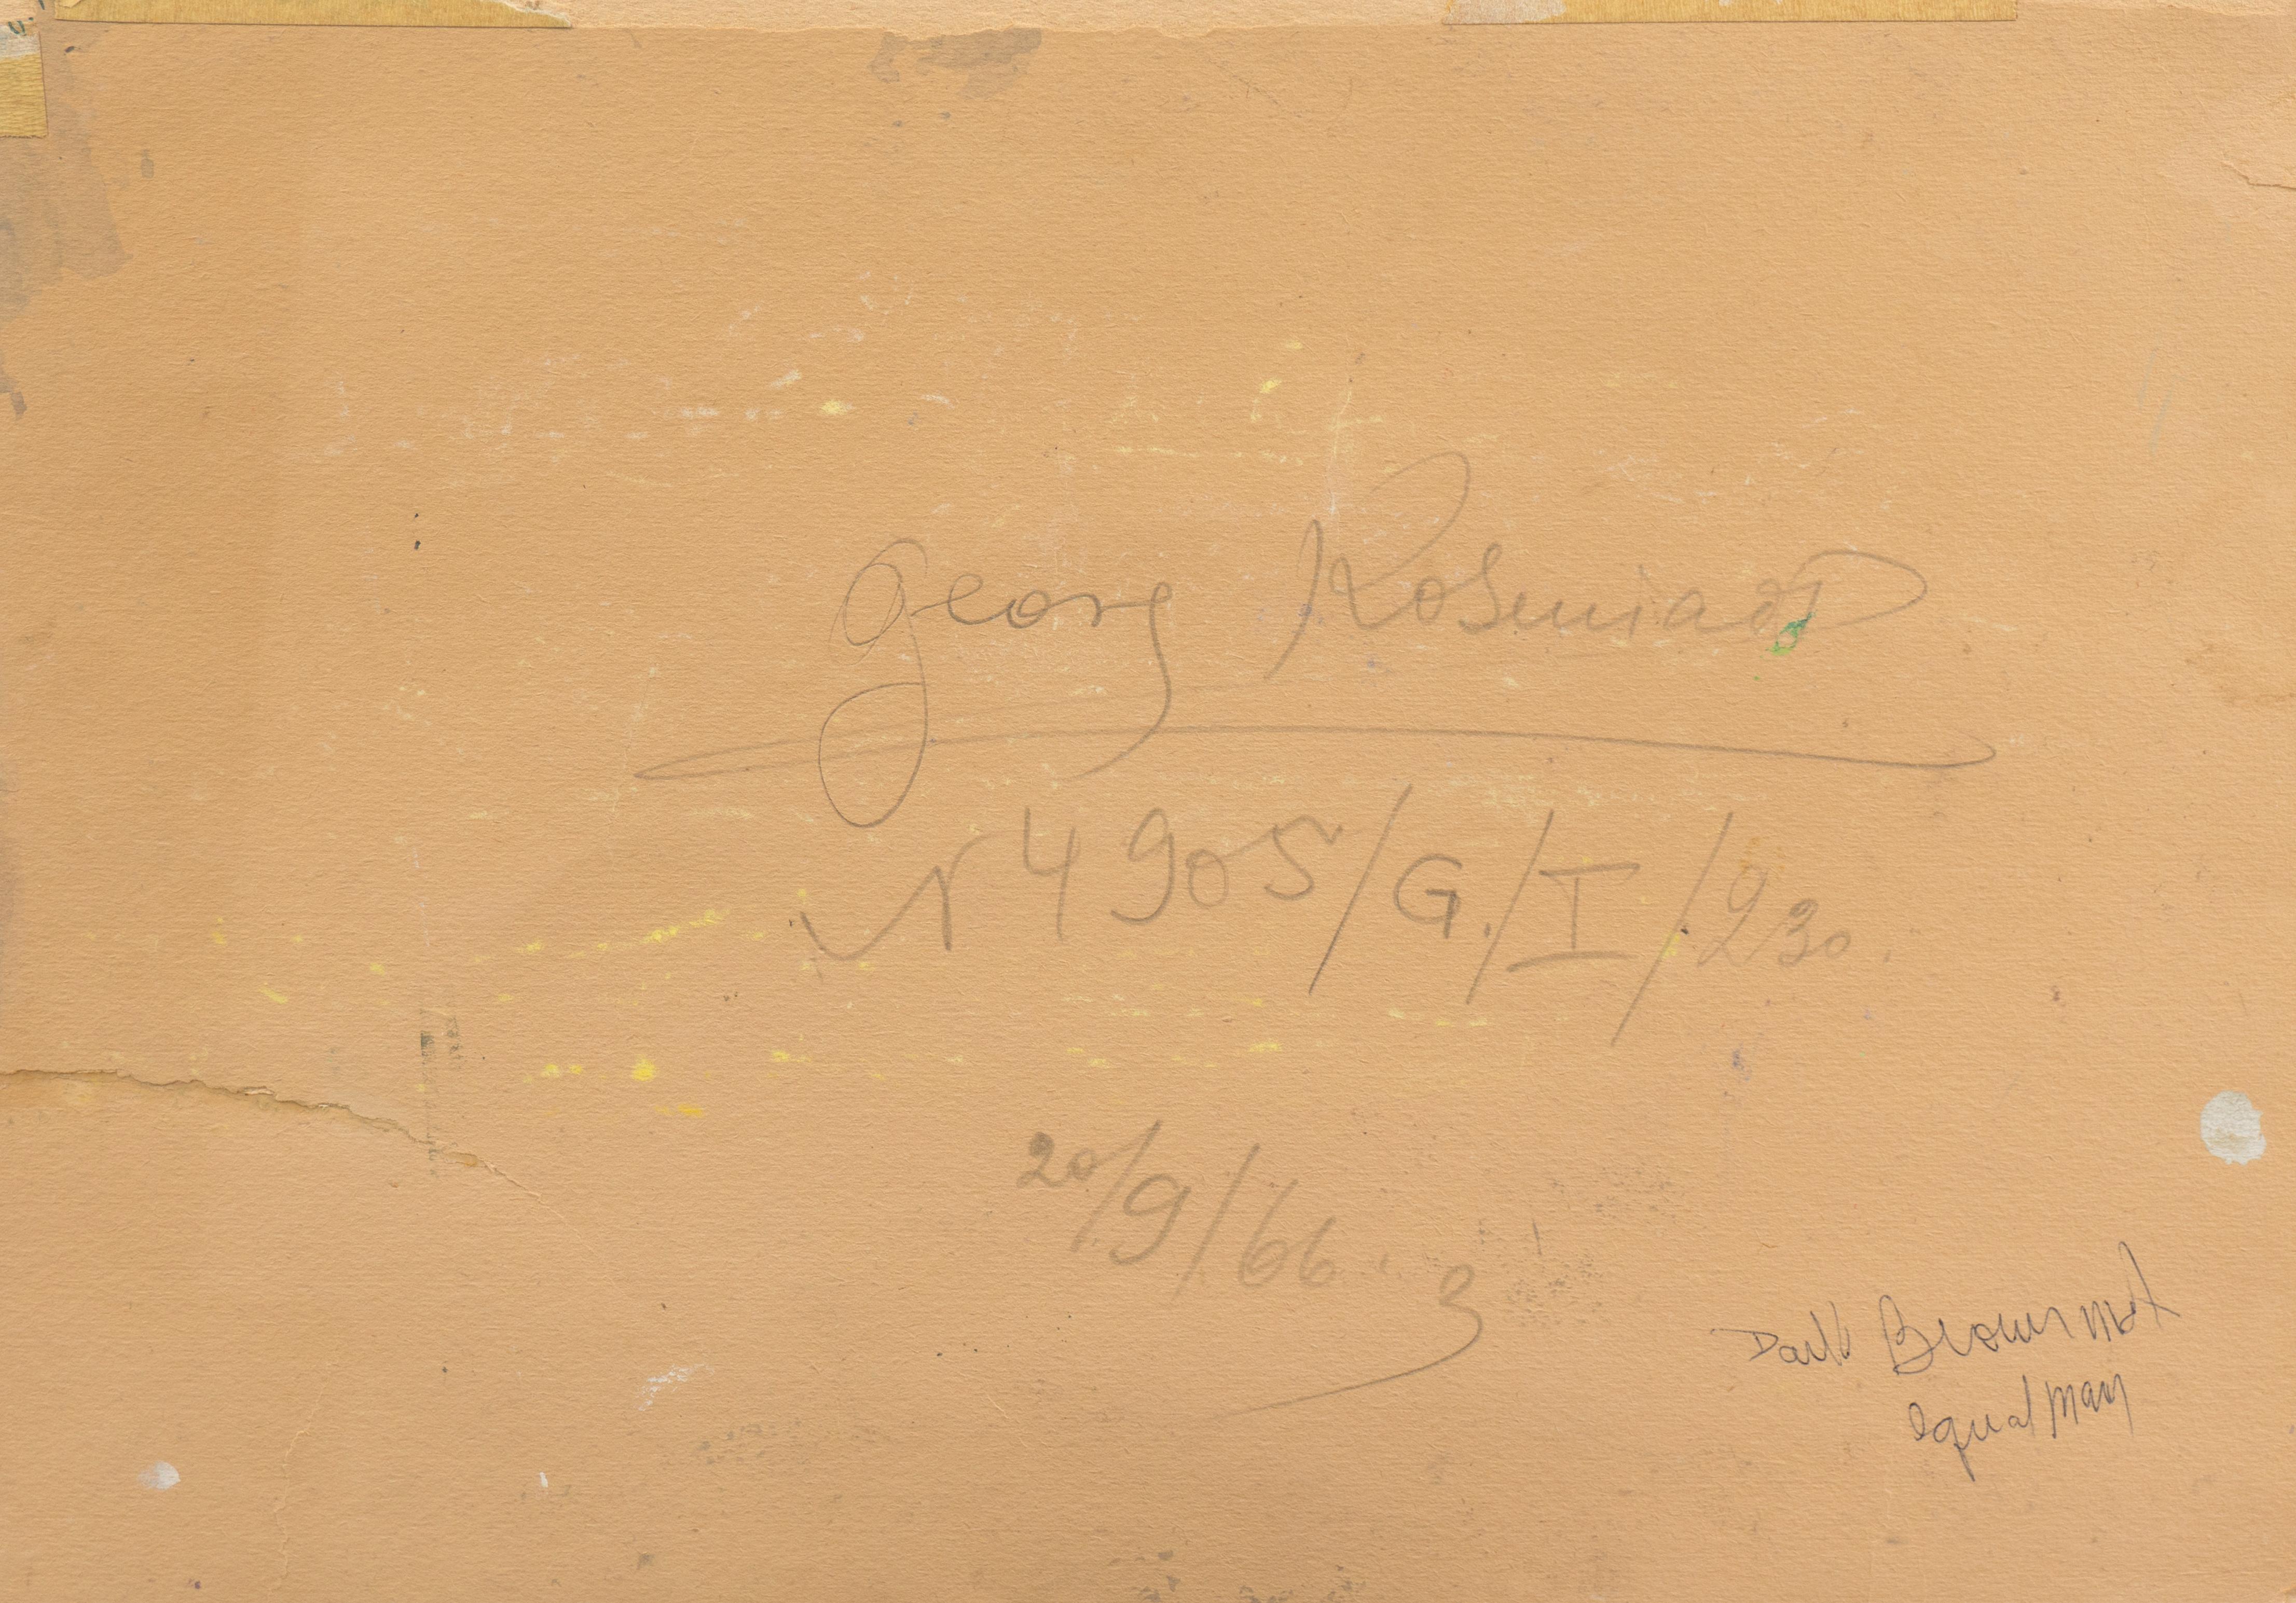 Signed lower right, 'G. Kosmiadi' for Georg Kosmiadi (Ukranian-German, 1886-1967) and dated, '66'; additionally signed verso, 'Georg Kosmiadi', inscribed with serial number and dated, '20/9/66'.

Georg Kosmiadi was a resident of Rivne before moving